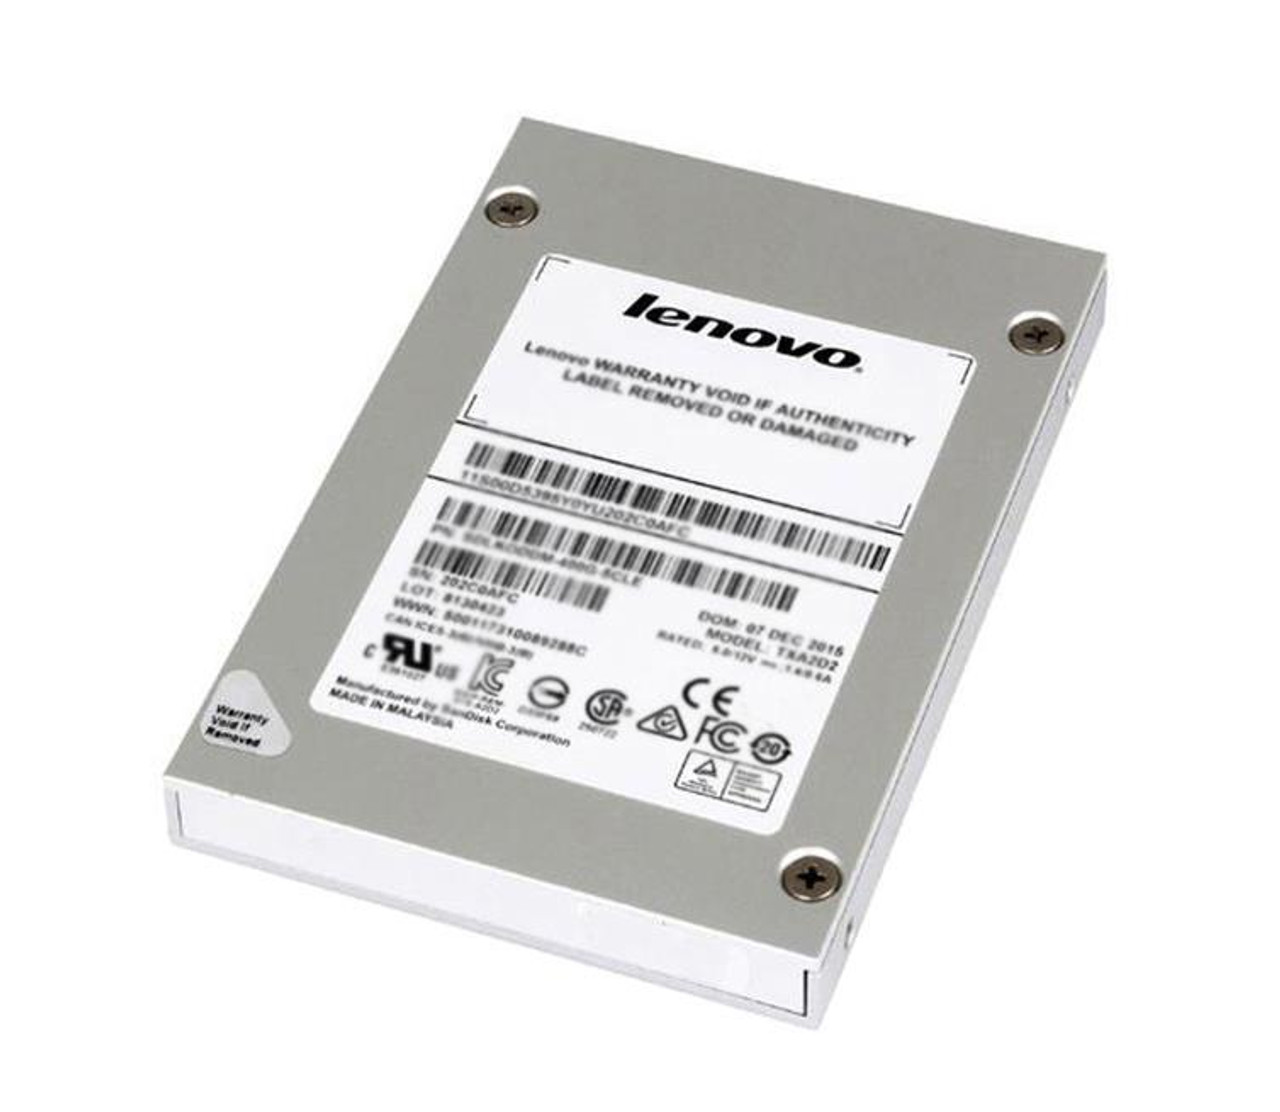 00UP267 Lenovo 120GB TLC SATA 6Gbps 2.5-inch Internal Solid State Drive (SSD)